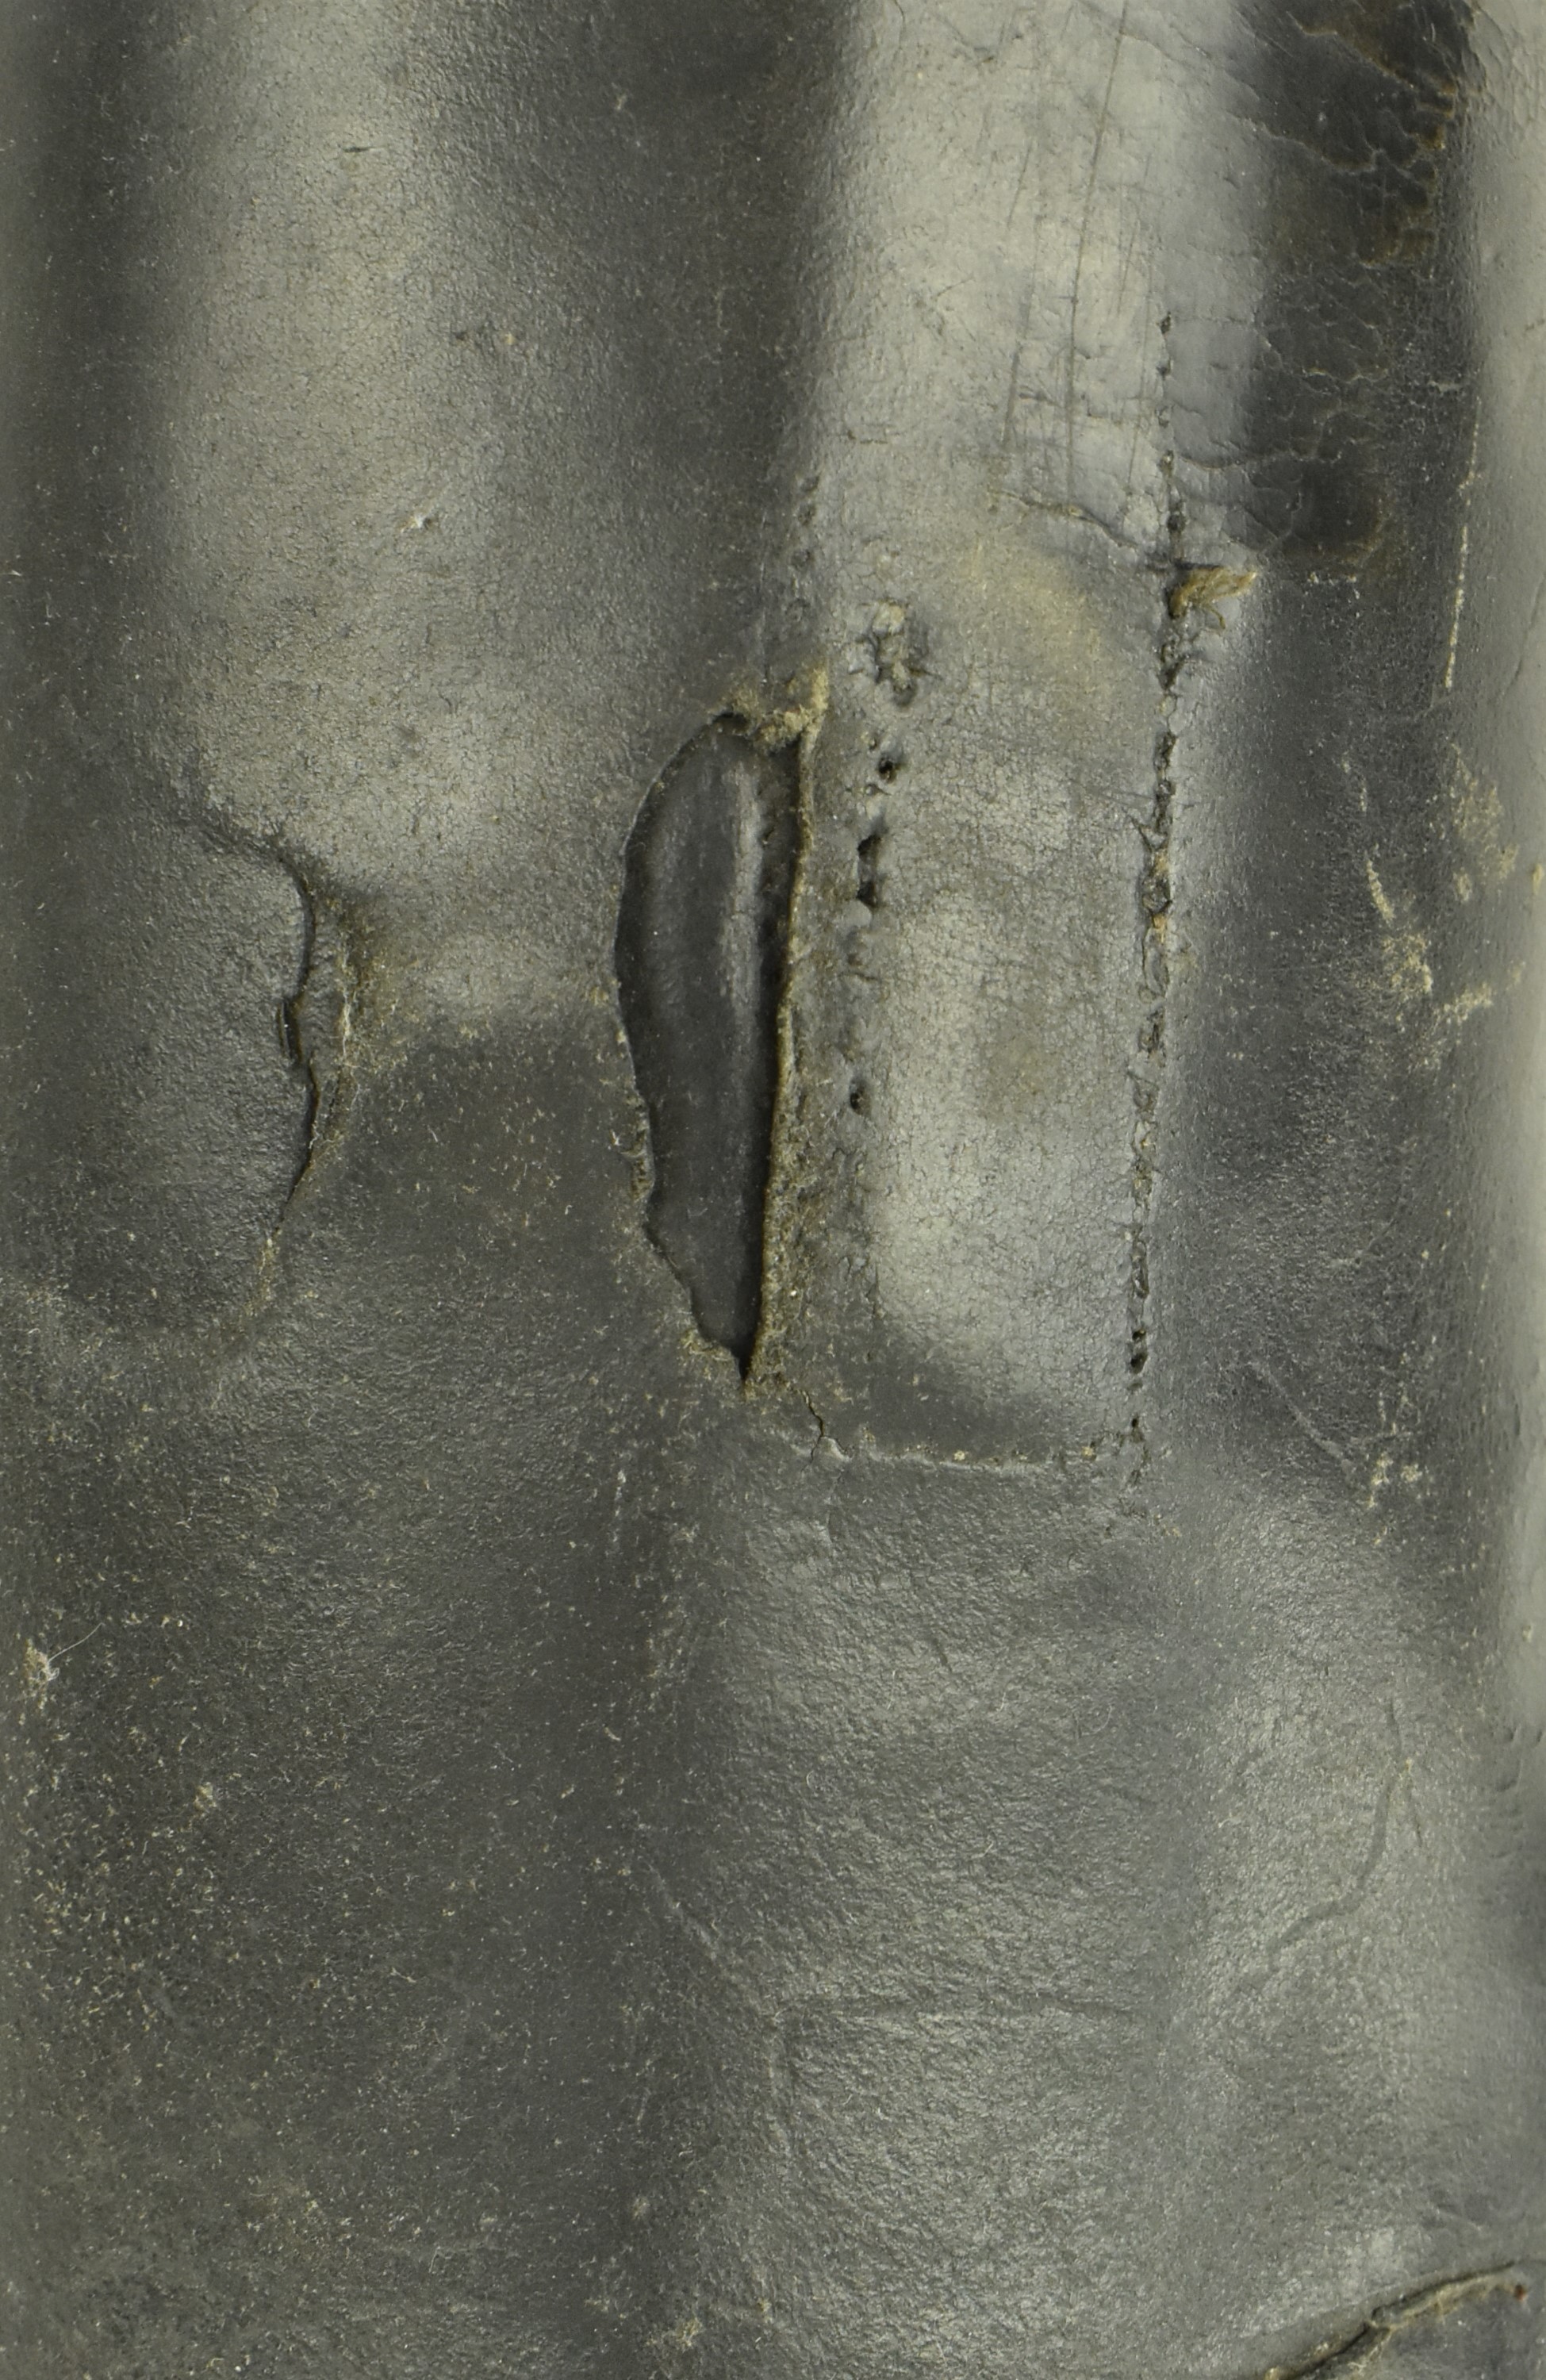 PAIR OF 20TH CENTURY BLACK LEATHER RIDING BOOTS AND TREES - Image 6 of 6